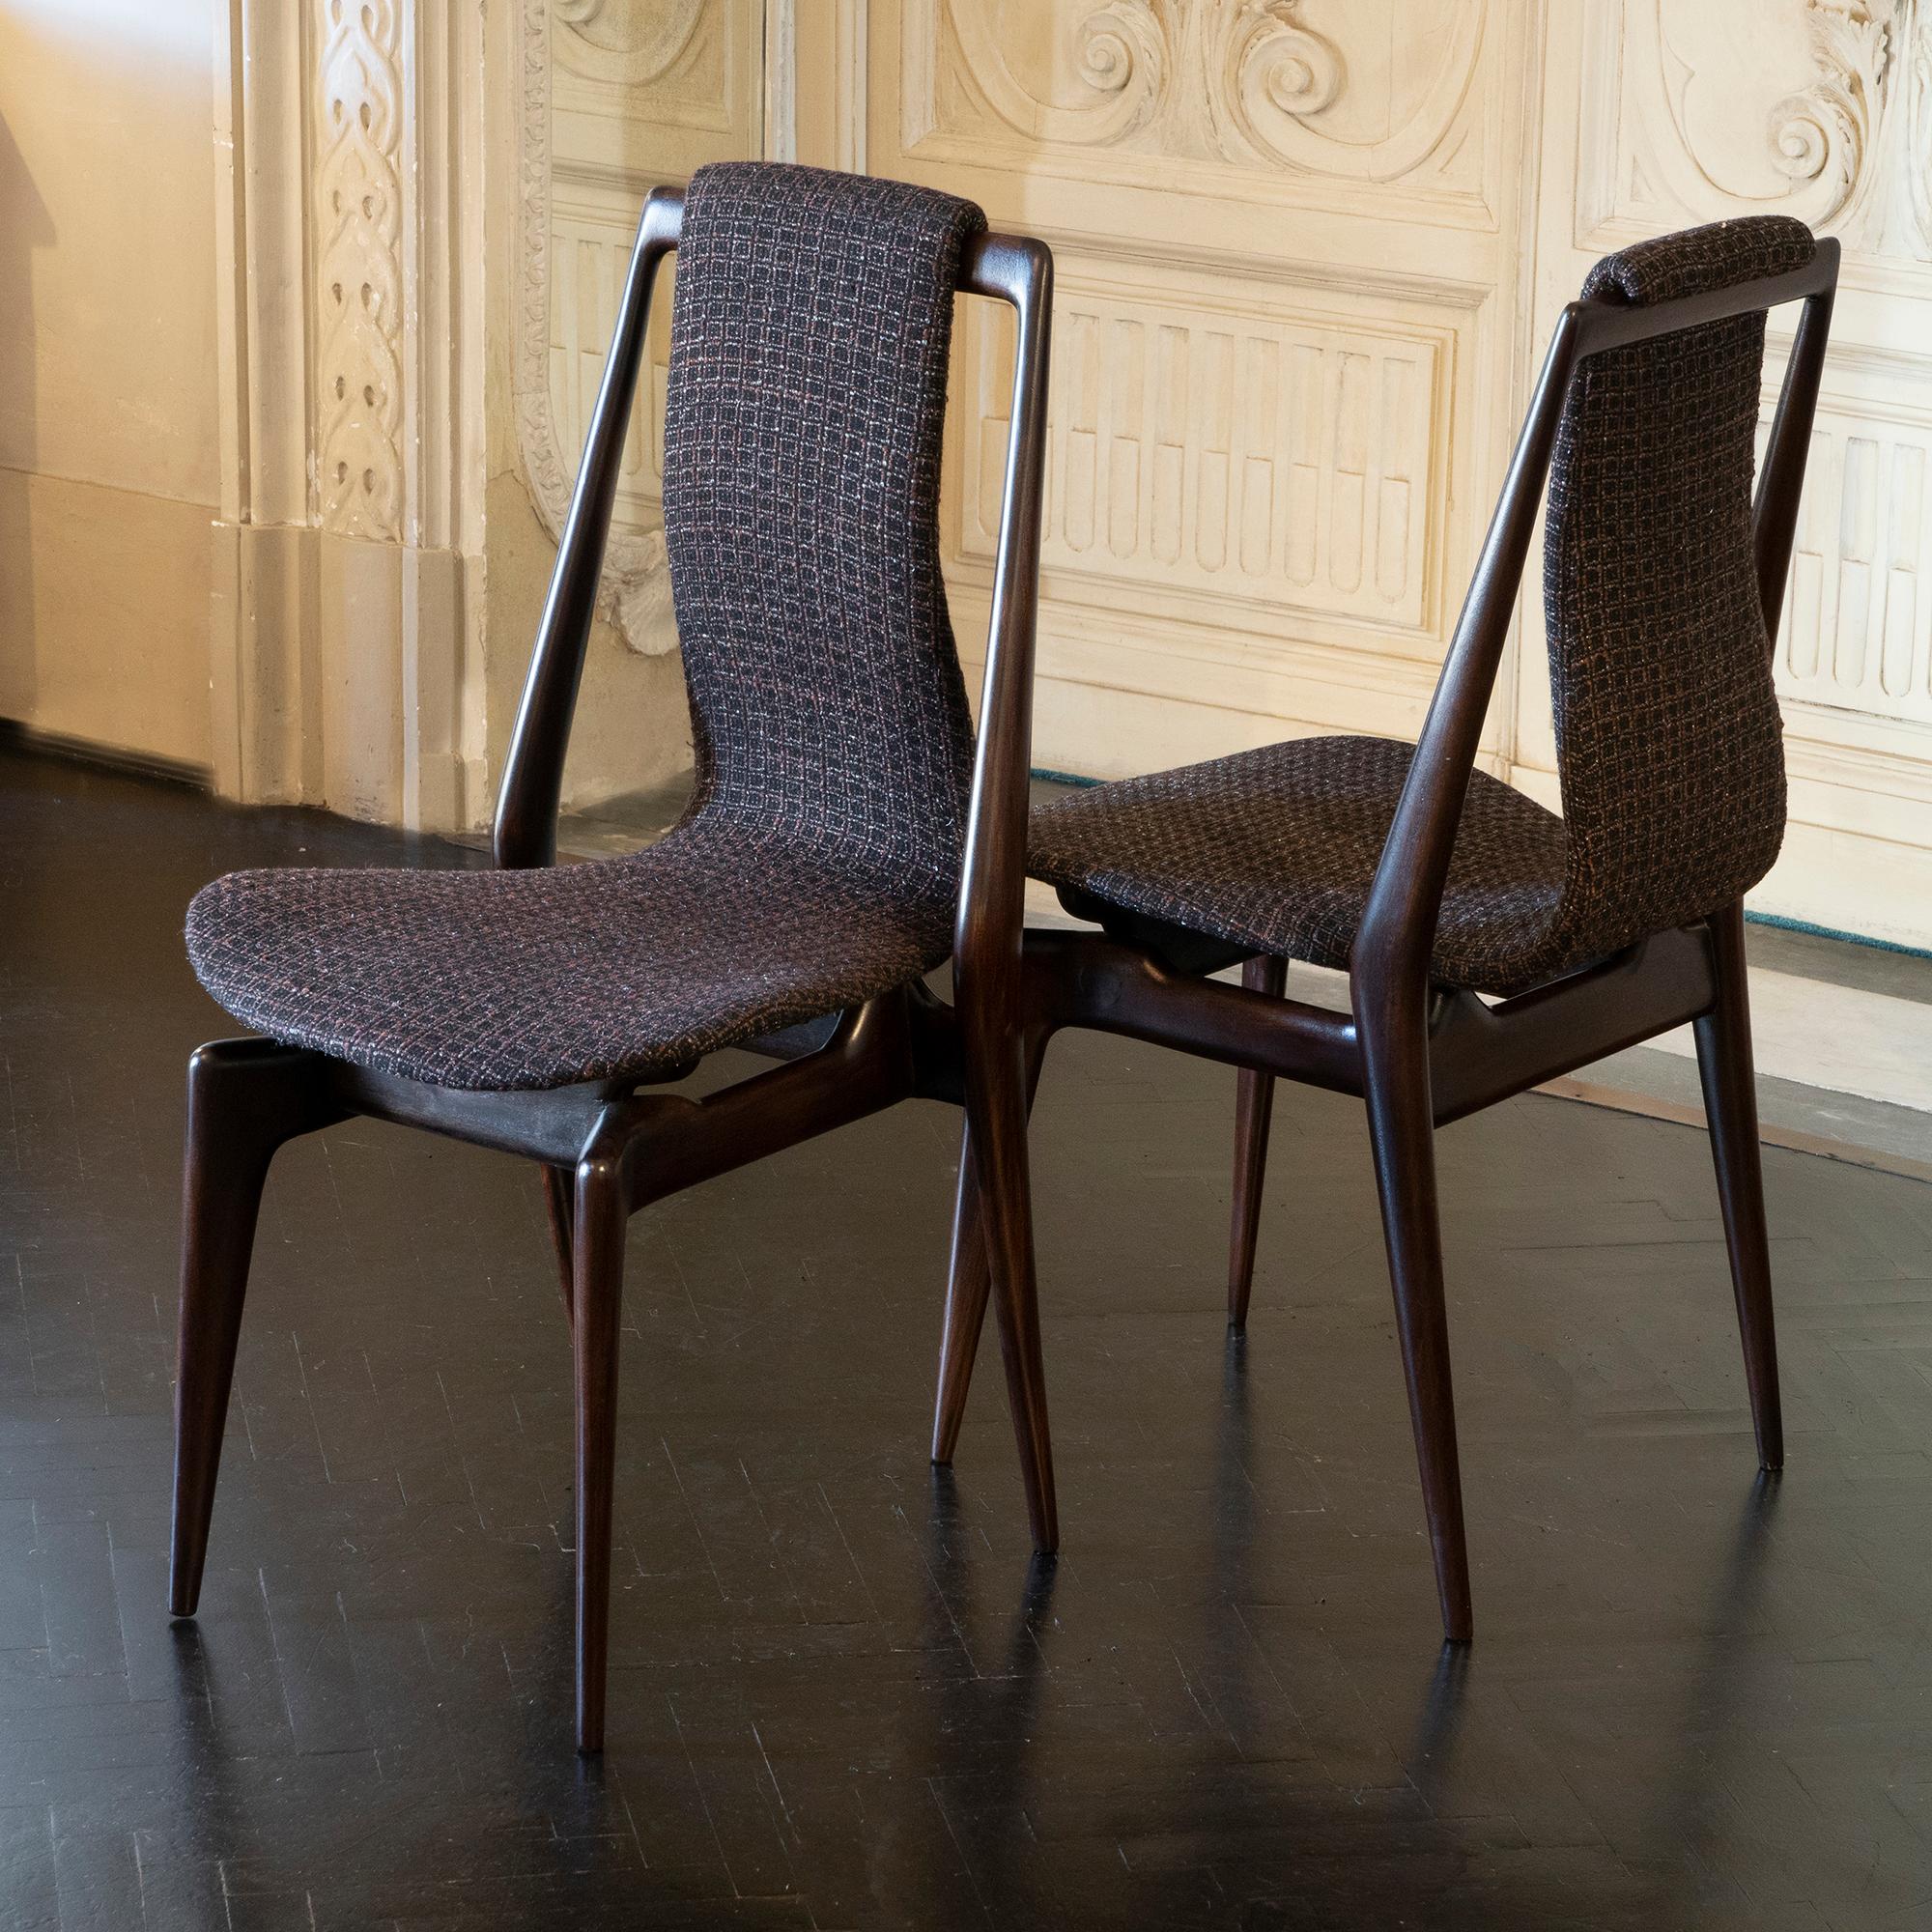 Set of six sculptural dining chairs, Mahogany structure, curved plywood seats newly reupholstered in black/brown jacquard fabric with a touch of light grey, Italy, 1950s.